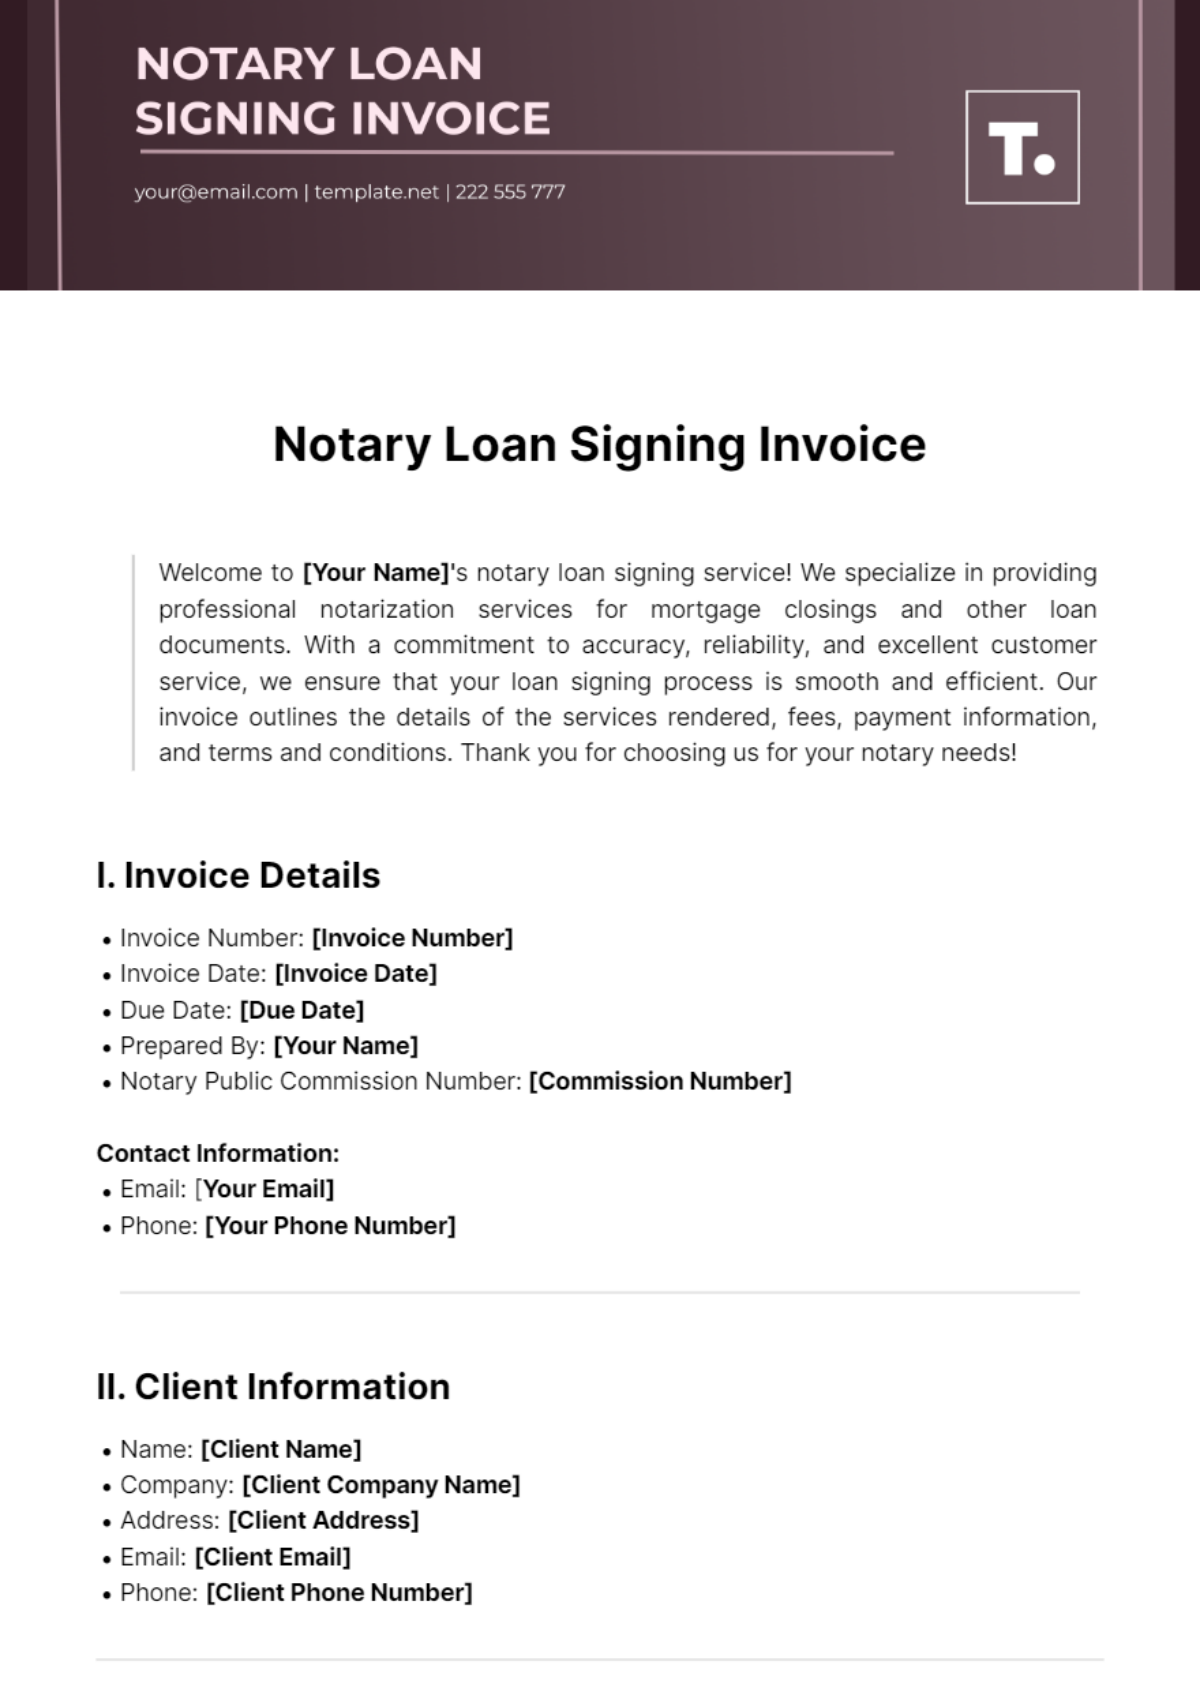 Free Notary Loan Signing Invoice Template